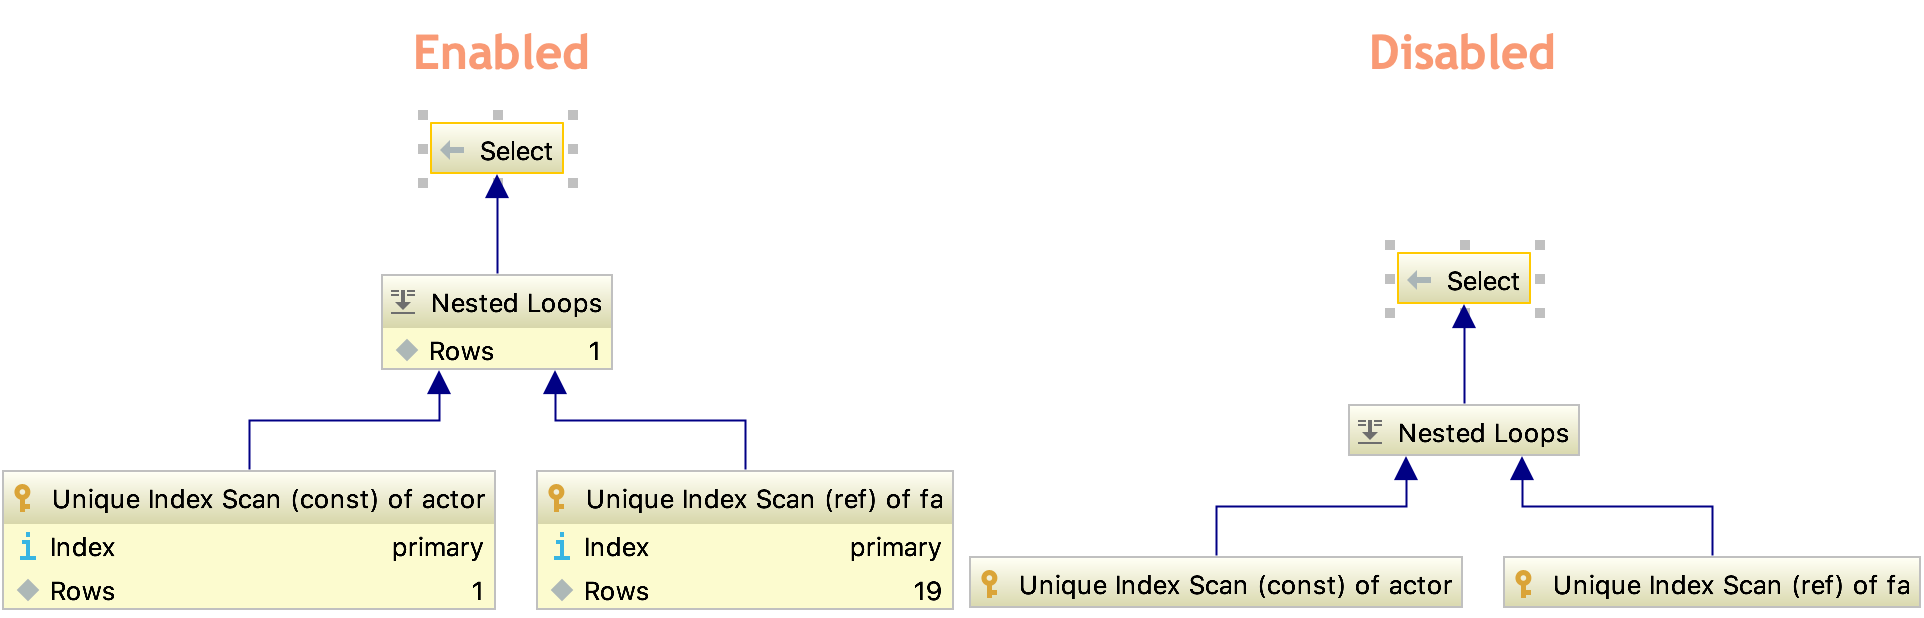 Enabled and disabled attributes on a query plan